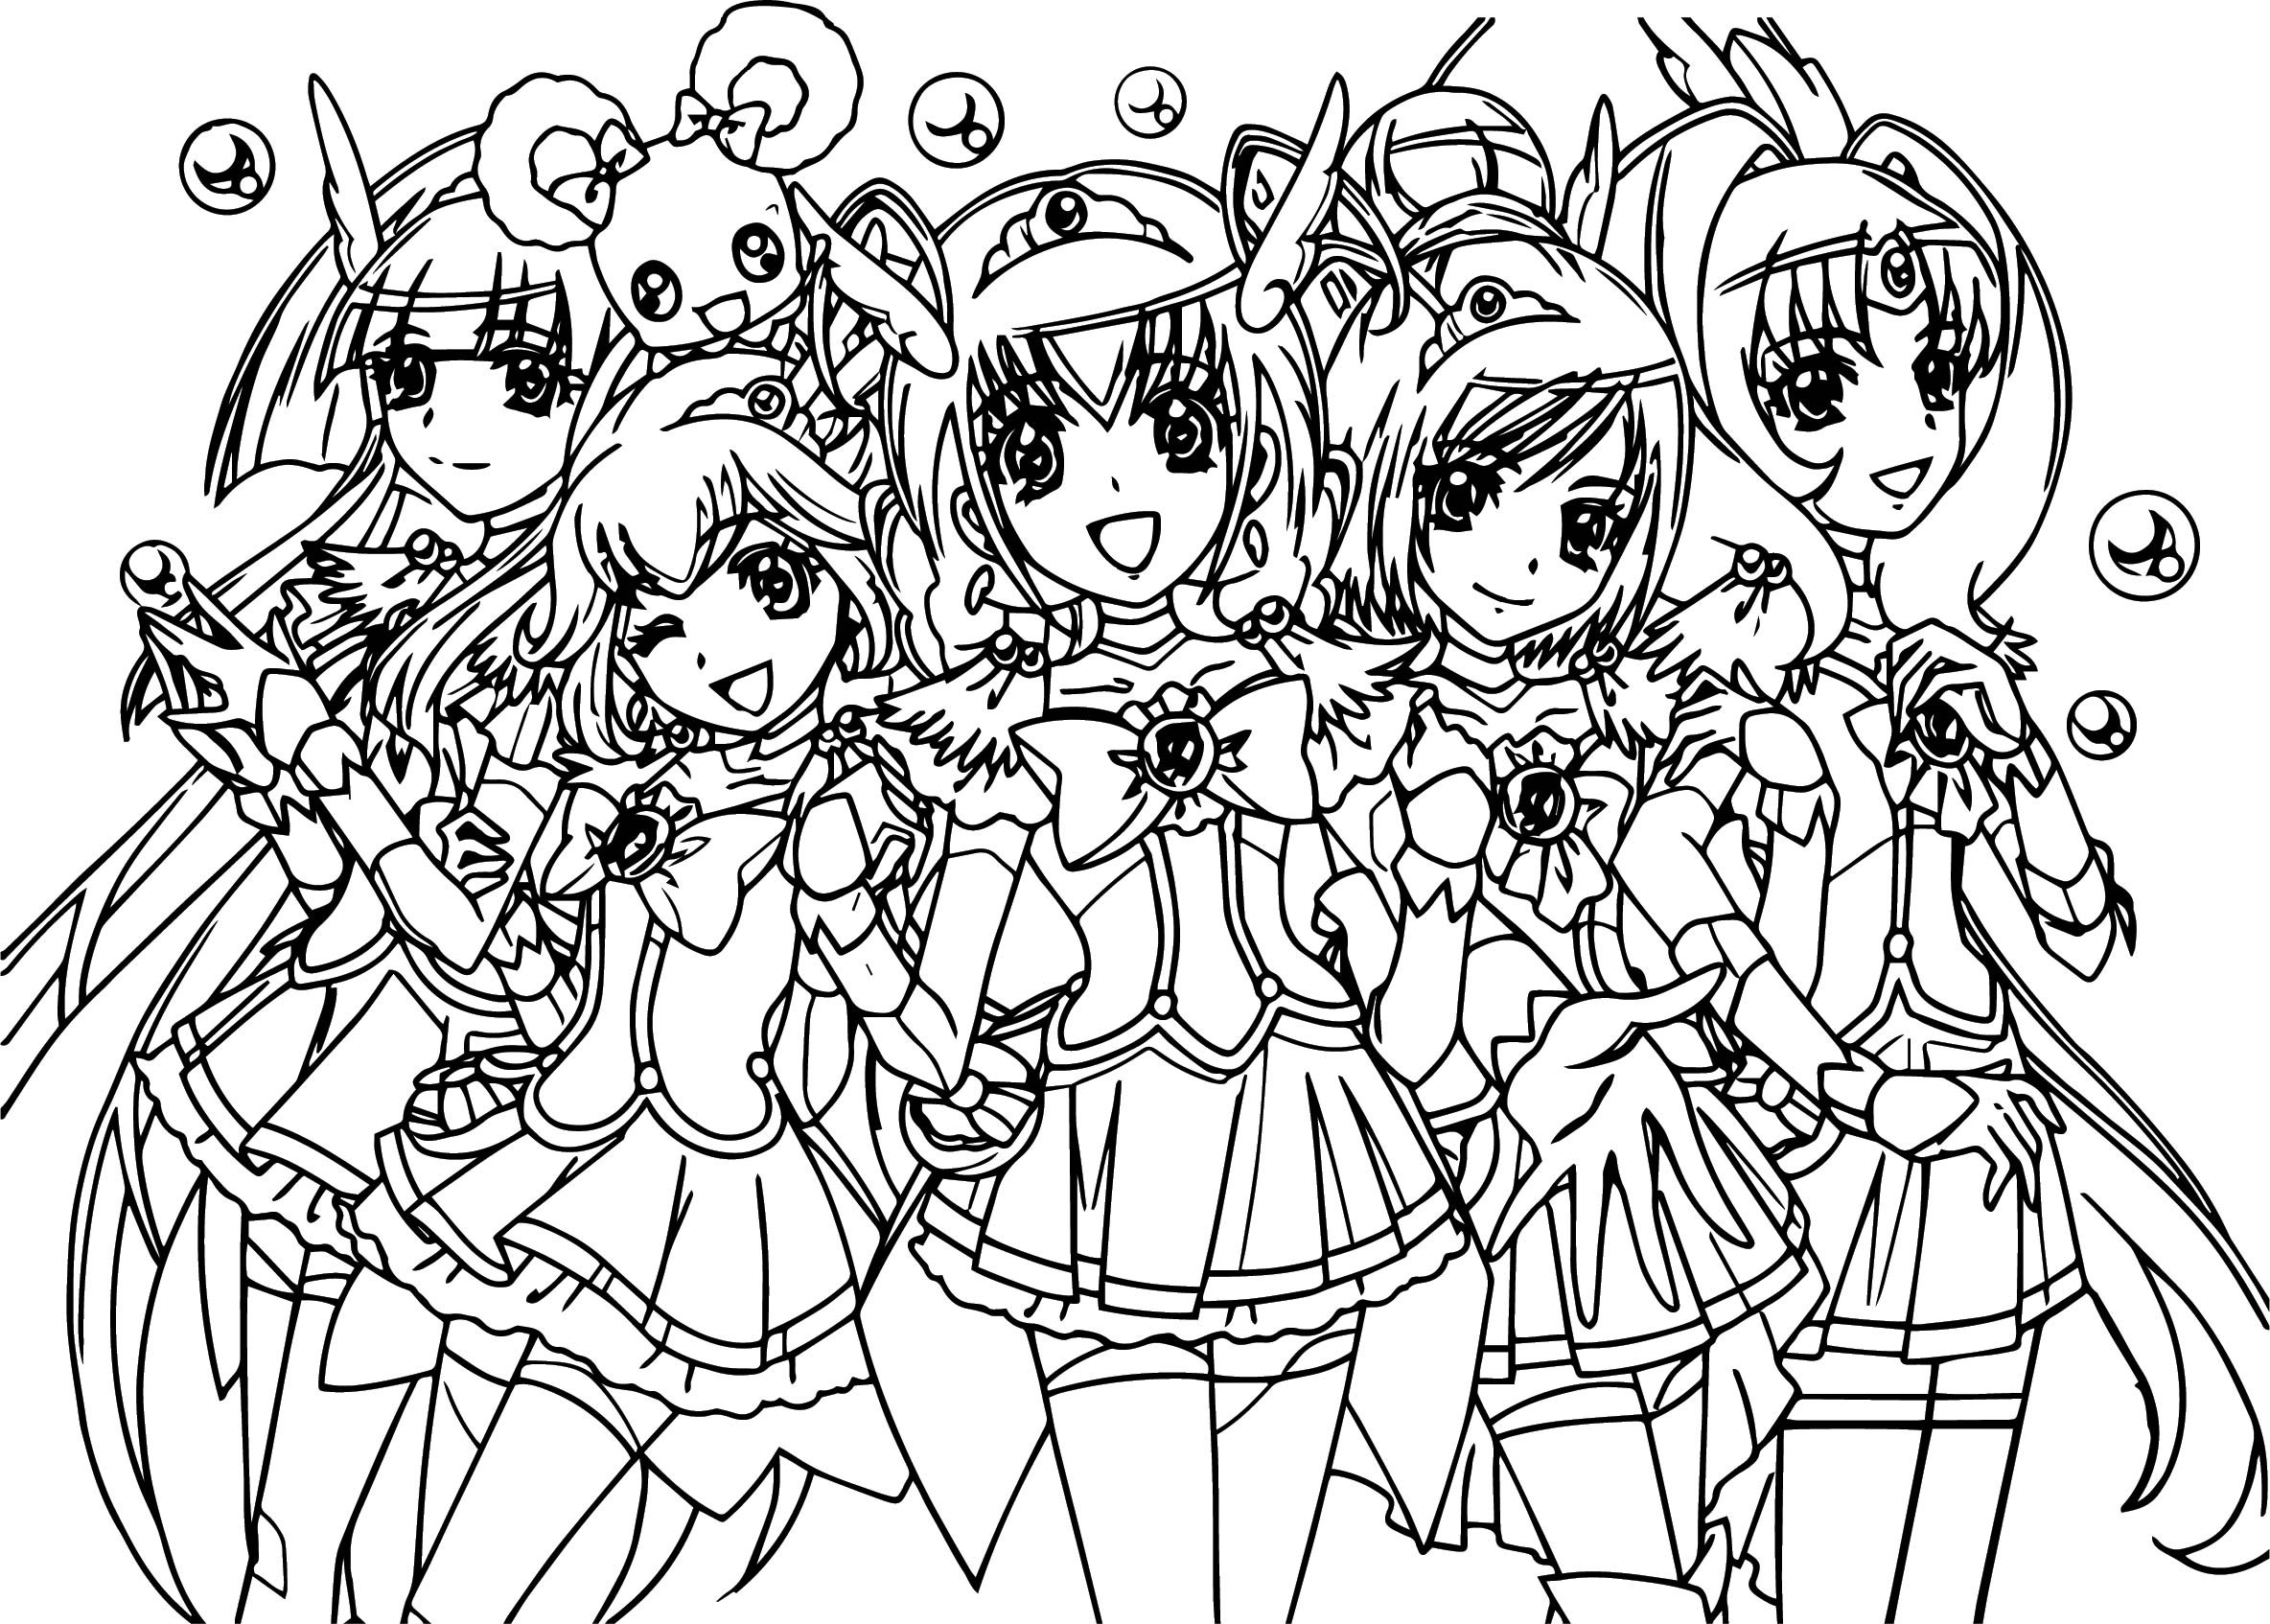 Gallery of Suite Precure Coloring Pages.